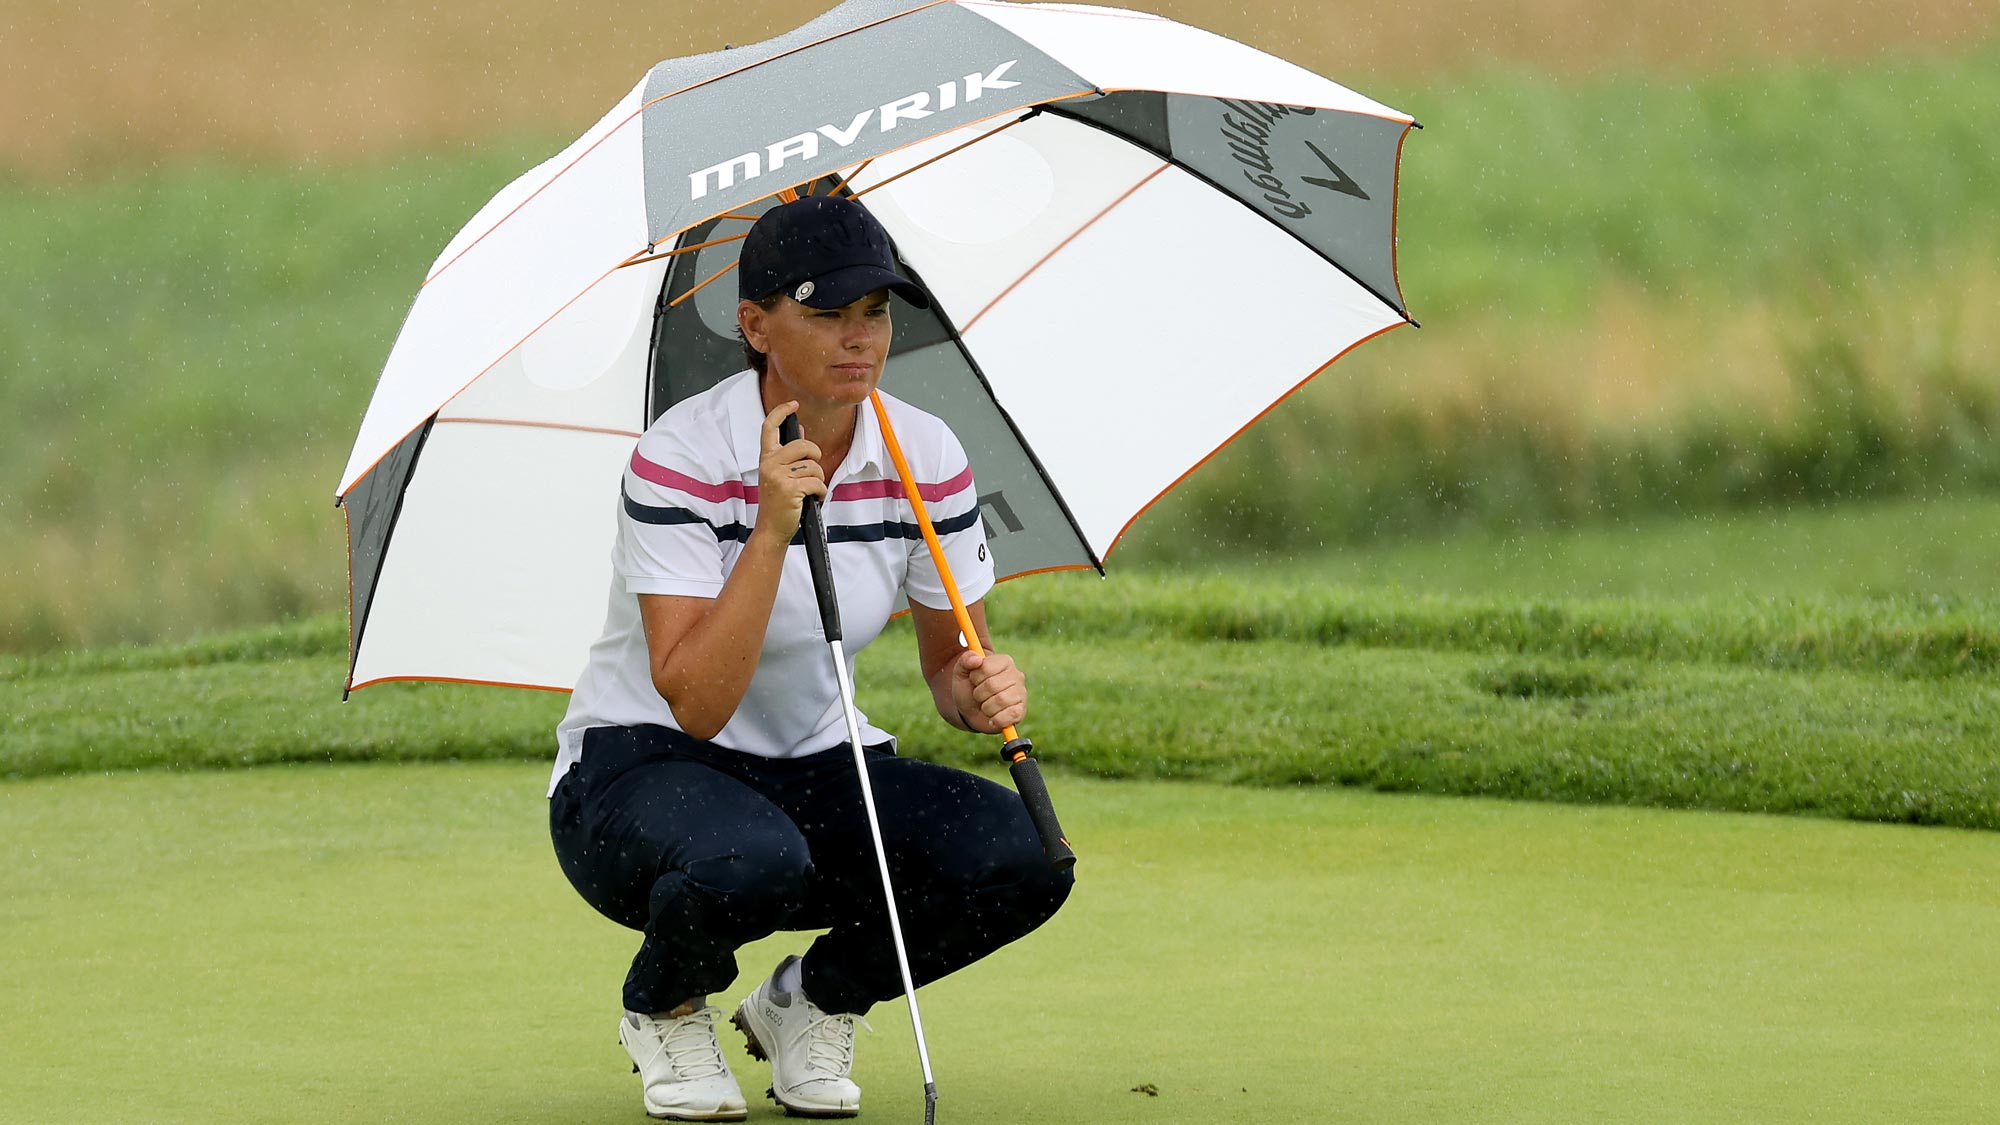 Lee-Anne Pace of South Africa lines up a putt on the fourth green under an umbrella to avoid the rain during the second round of the LPGA Drive On Championship